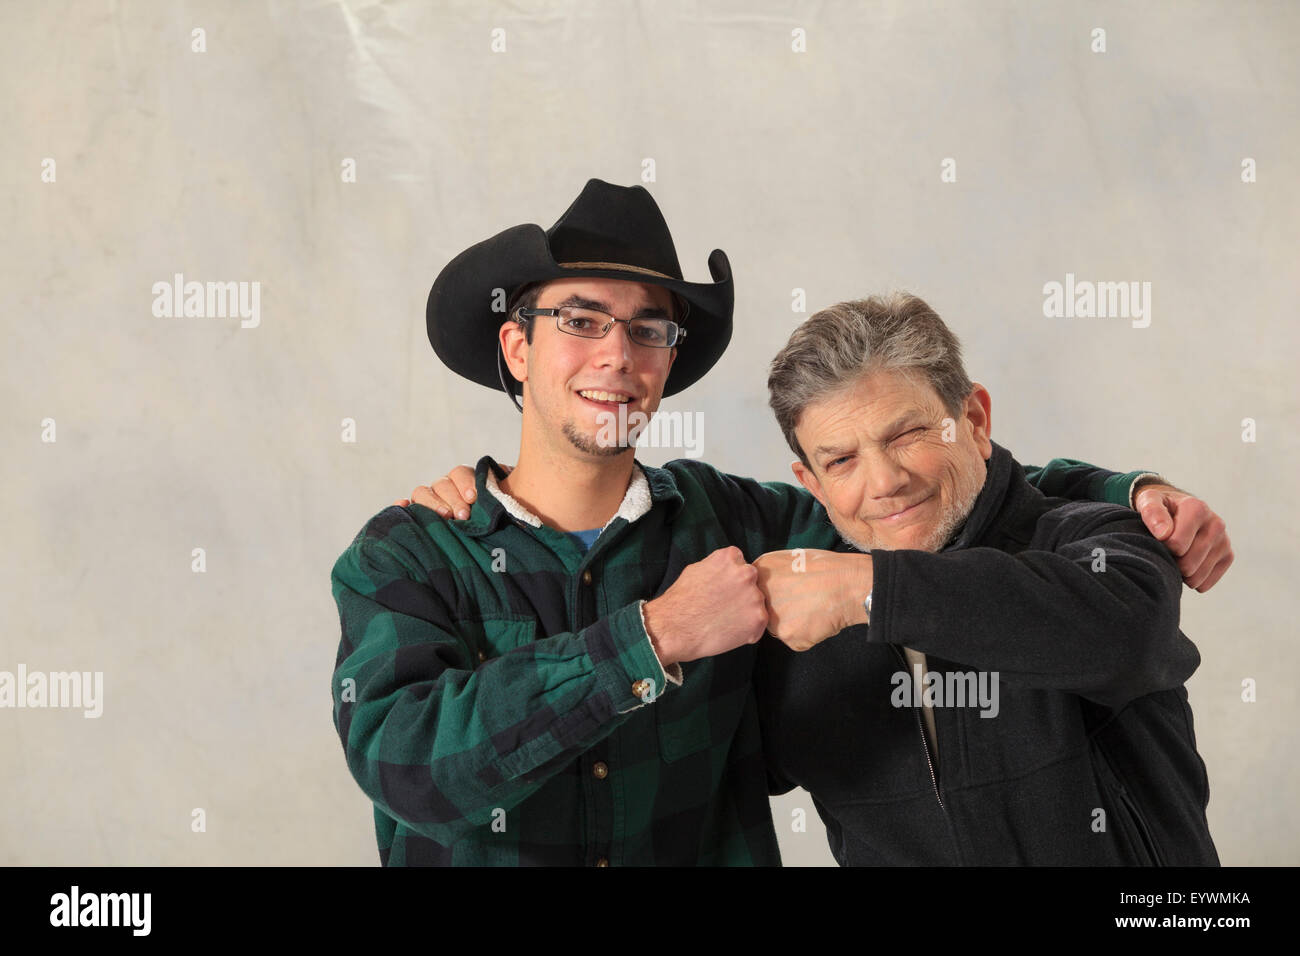 Young man with autism and his mentor smiling and knocking knuckles Stock Photo